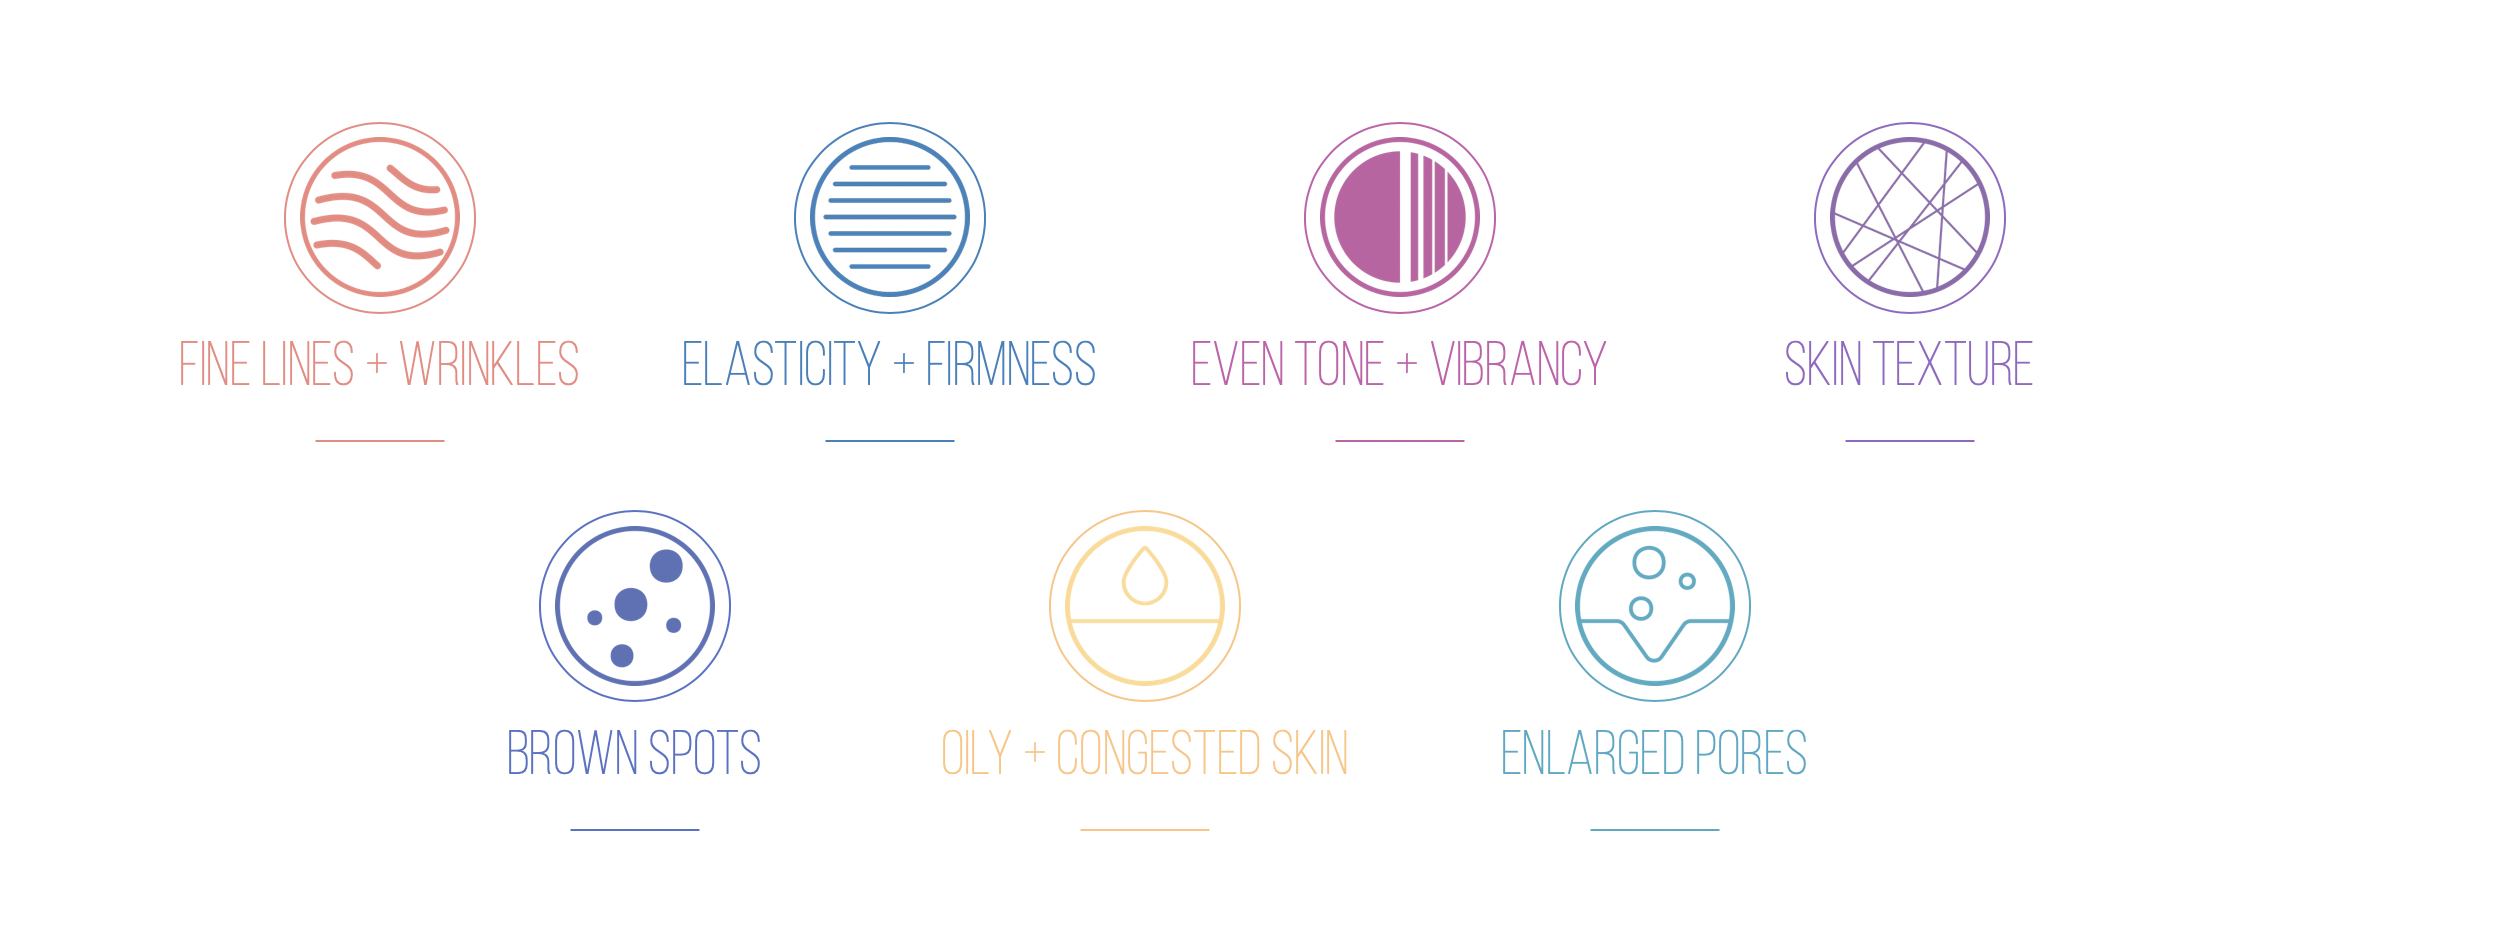 How HydraFacial © works? - Infography showing HydraFacial scope of work